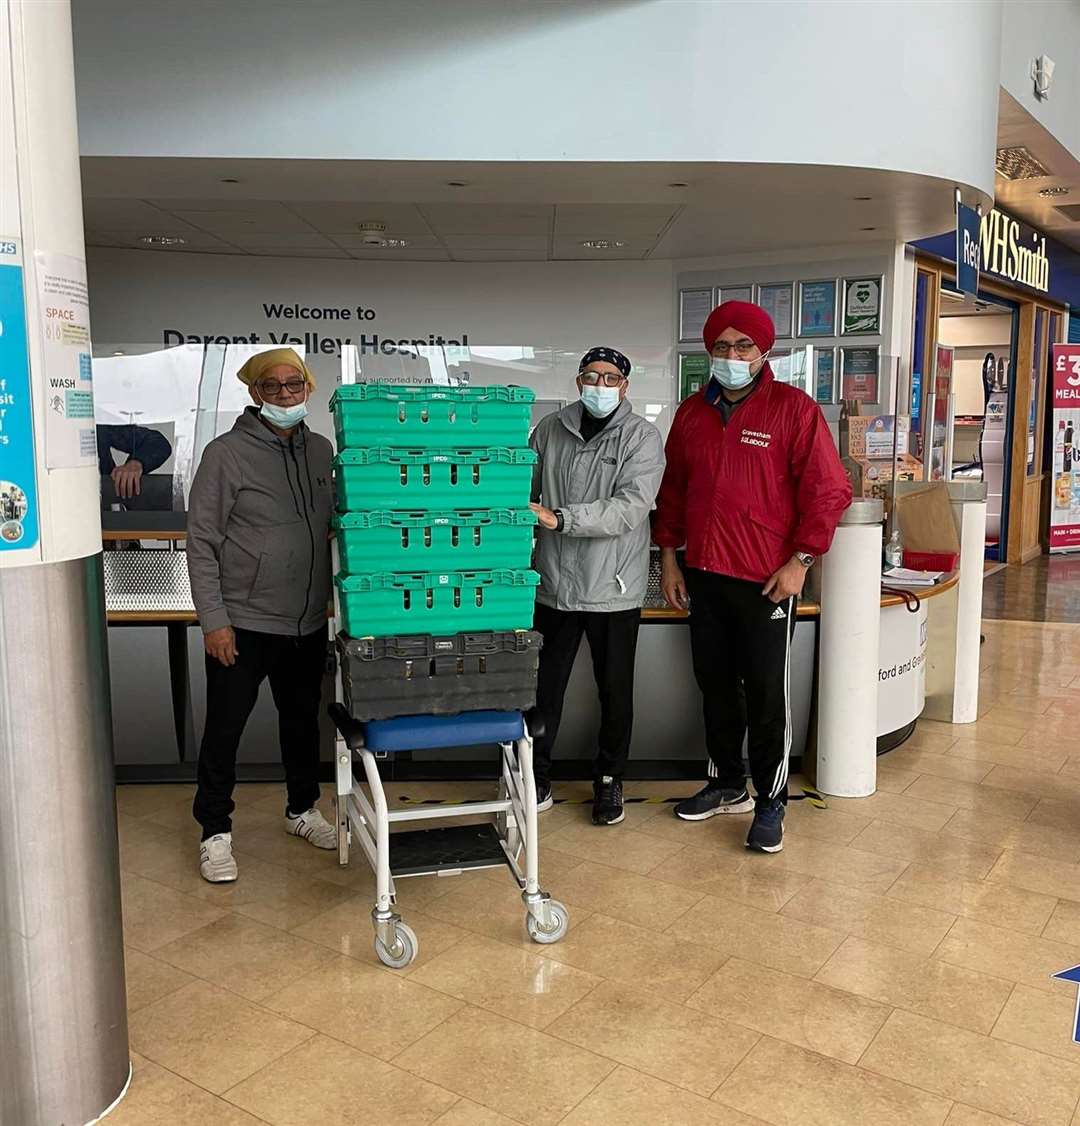 Tony Rana, pictured far right, helped coordinate the efforts to deliver meals to hungry hospital workers. Photo: Sikh Guru Nanak Darbar Gurdwara Gravesend